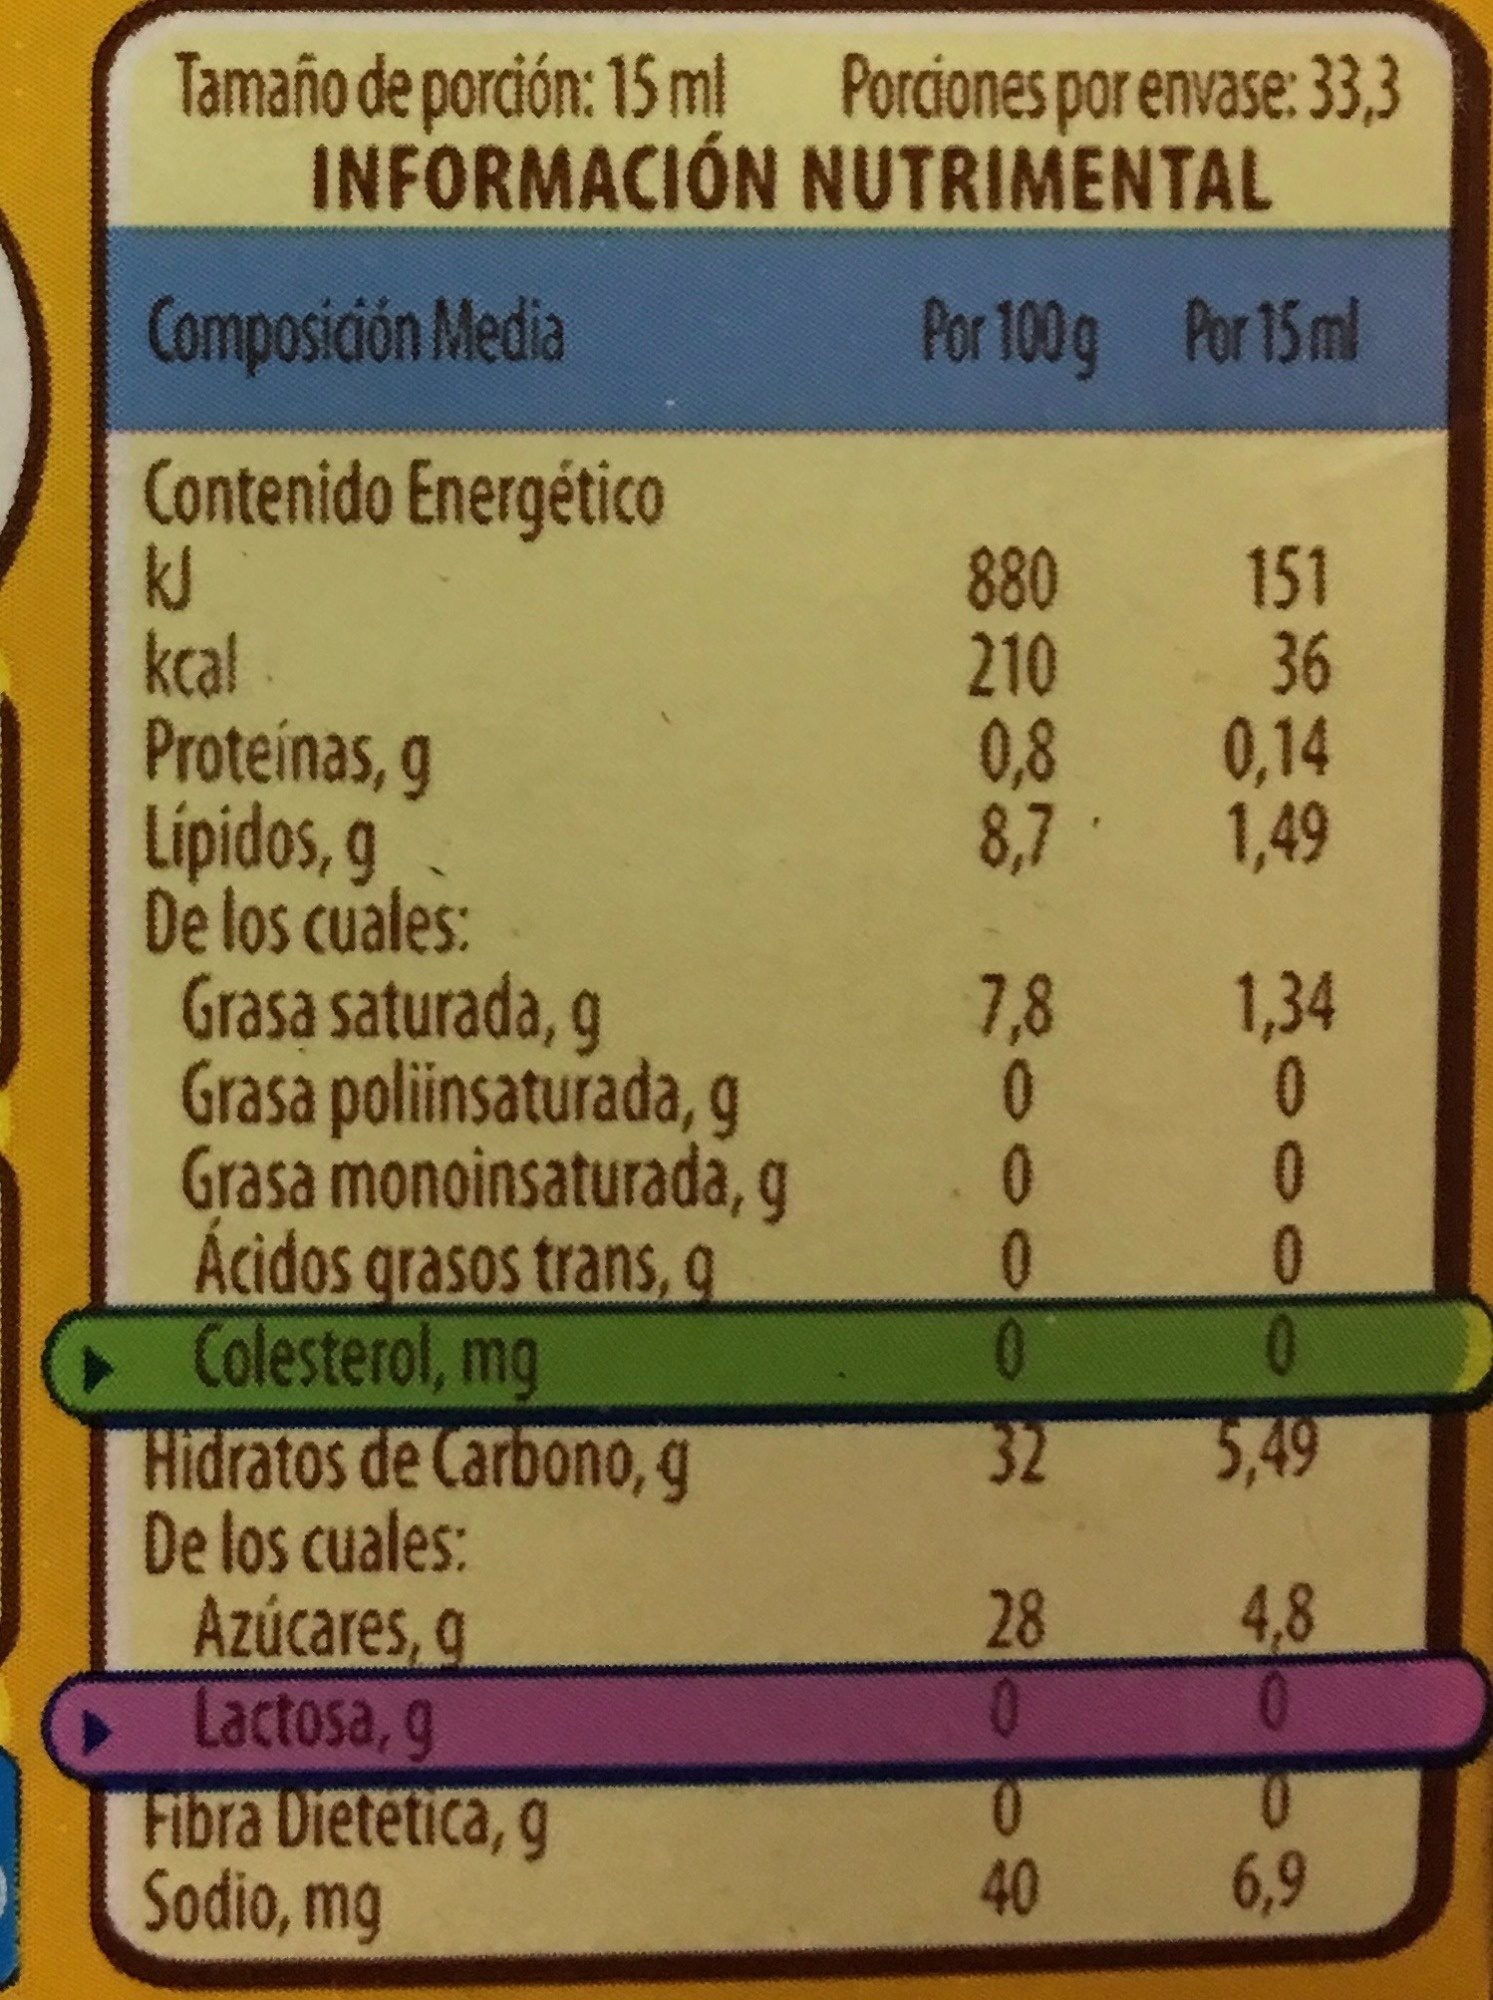 COFFEE MATE AVELLANA - Nutrition facts - es